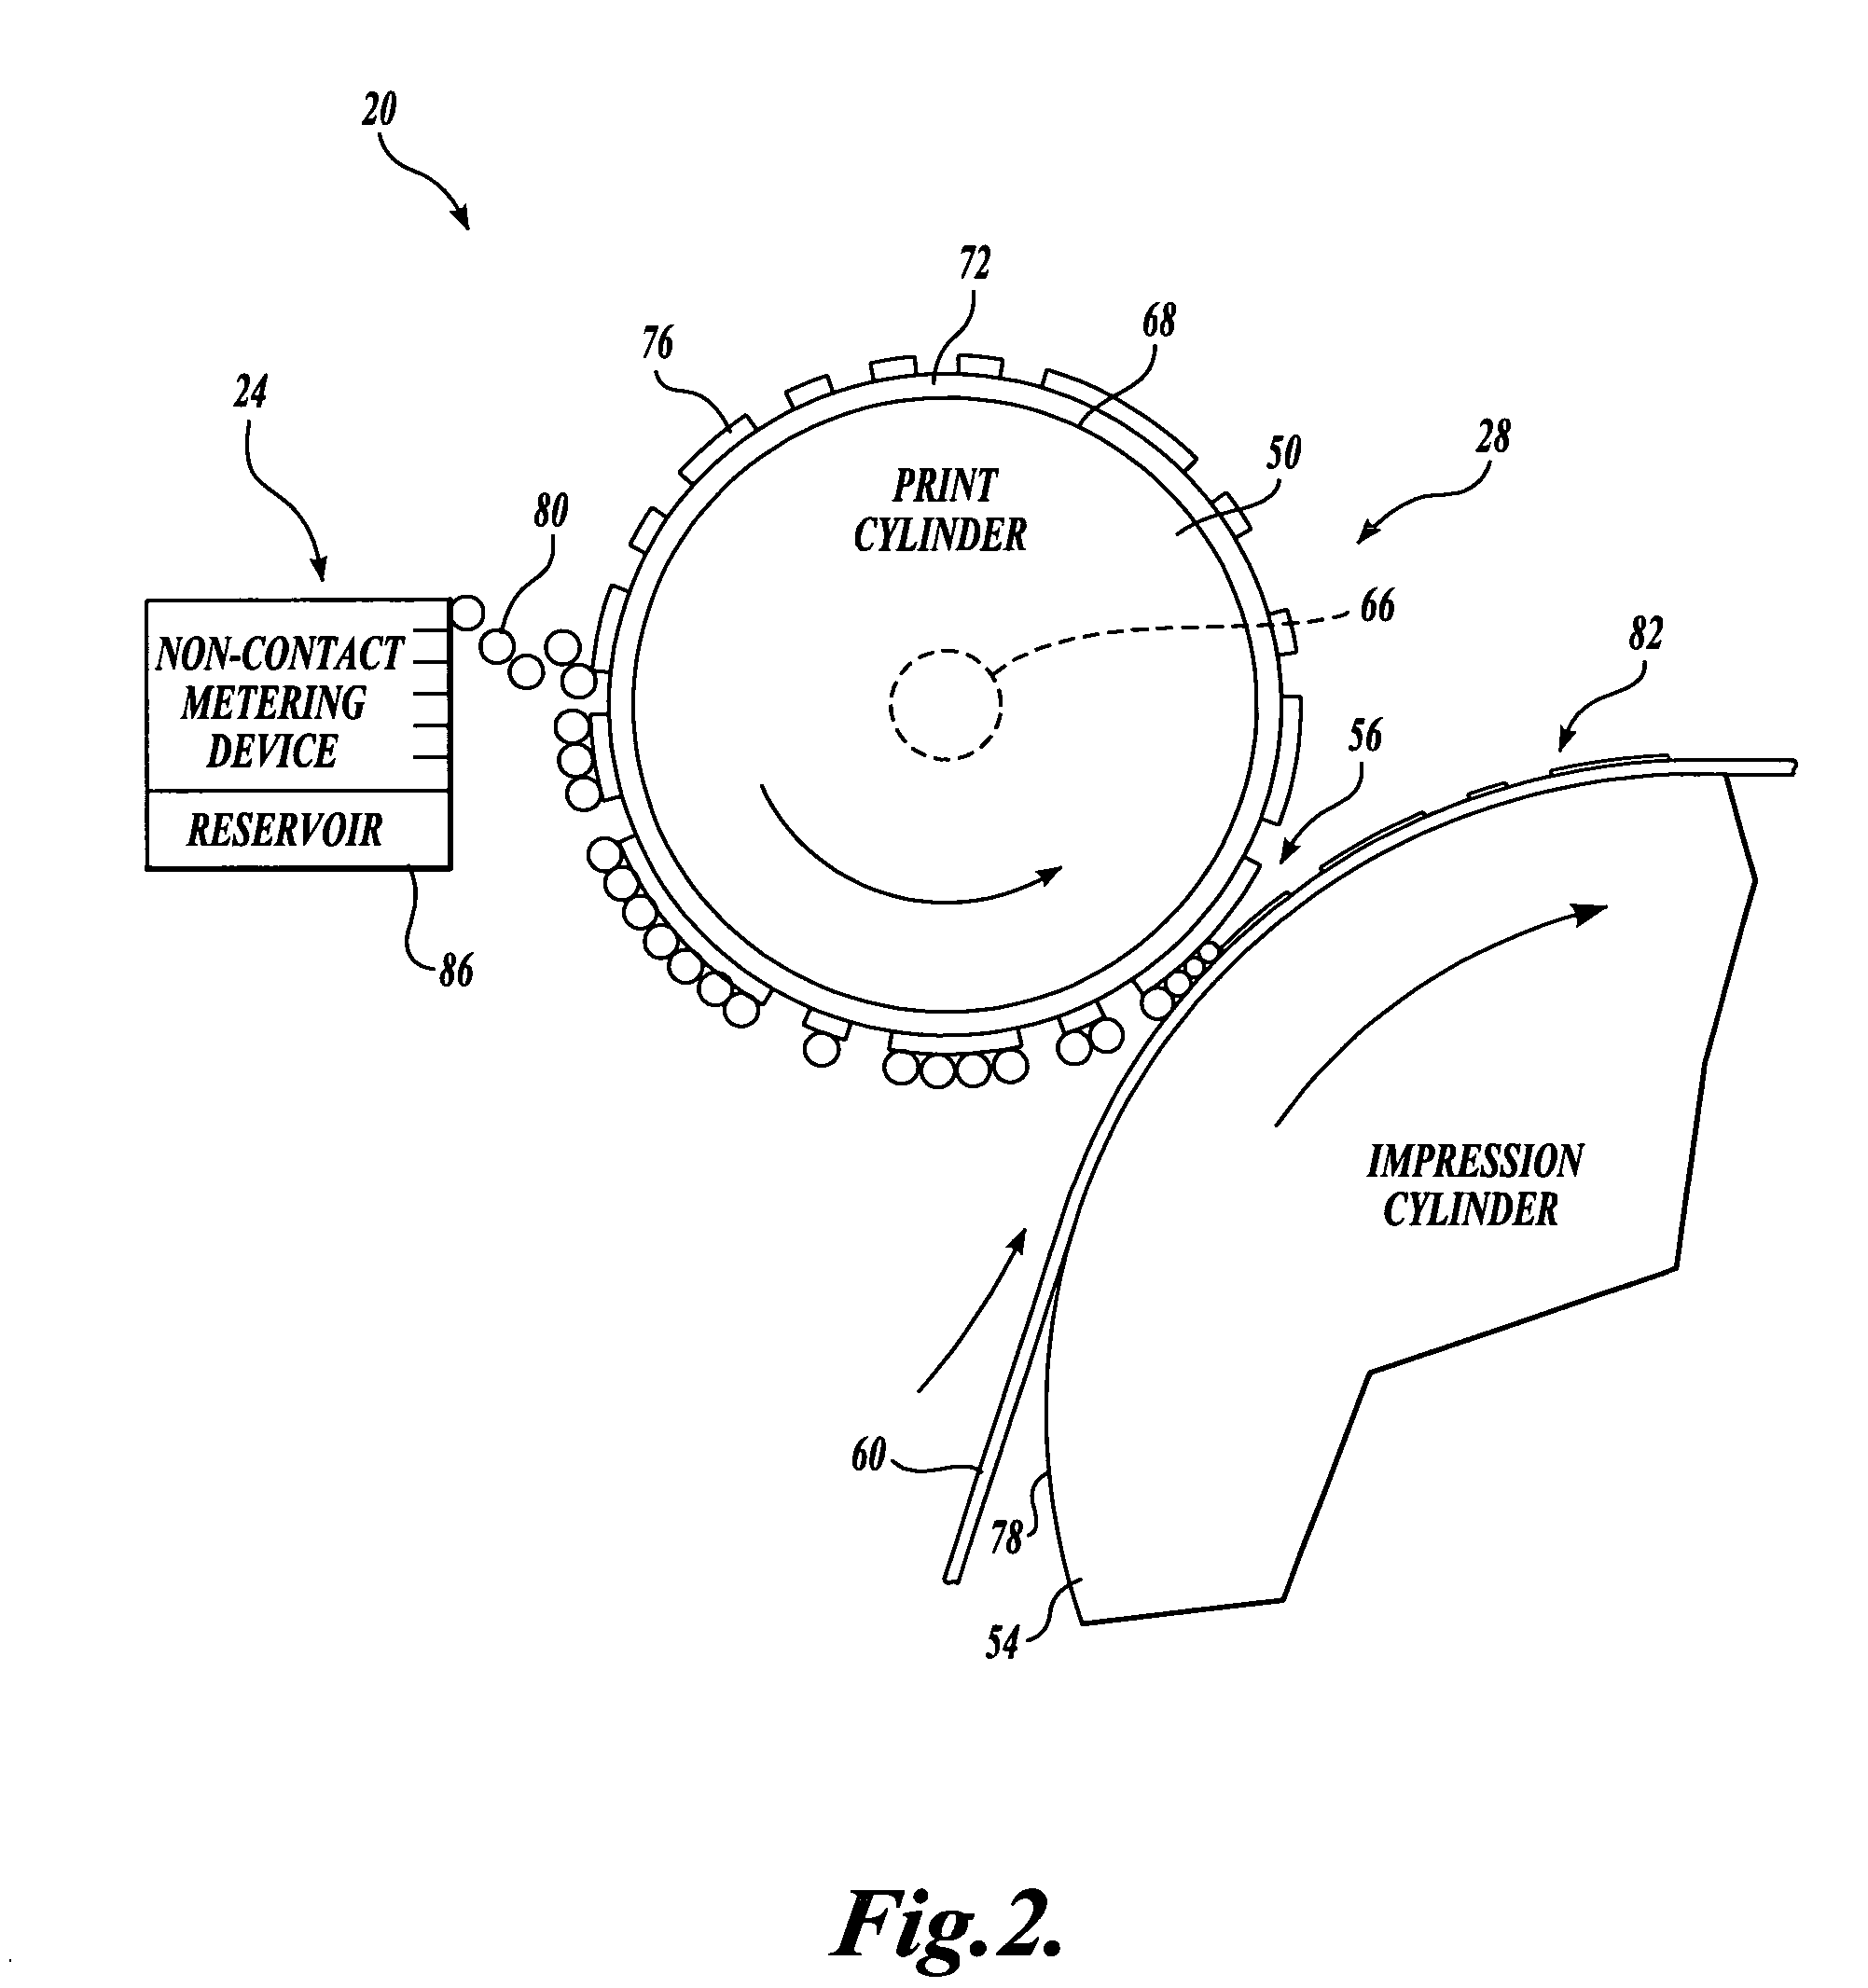 Systems and methods for additive deposition of materials onto a substrate